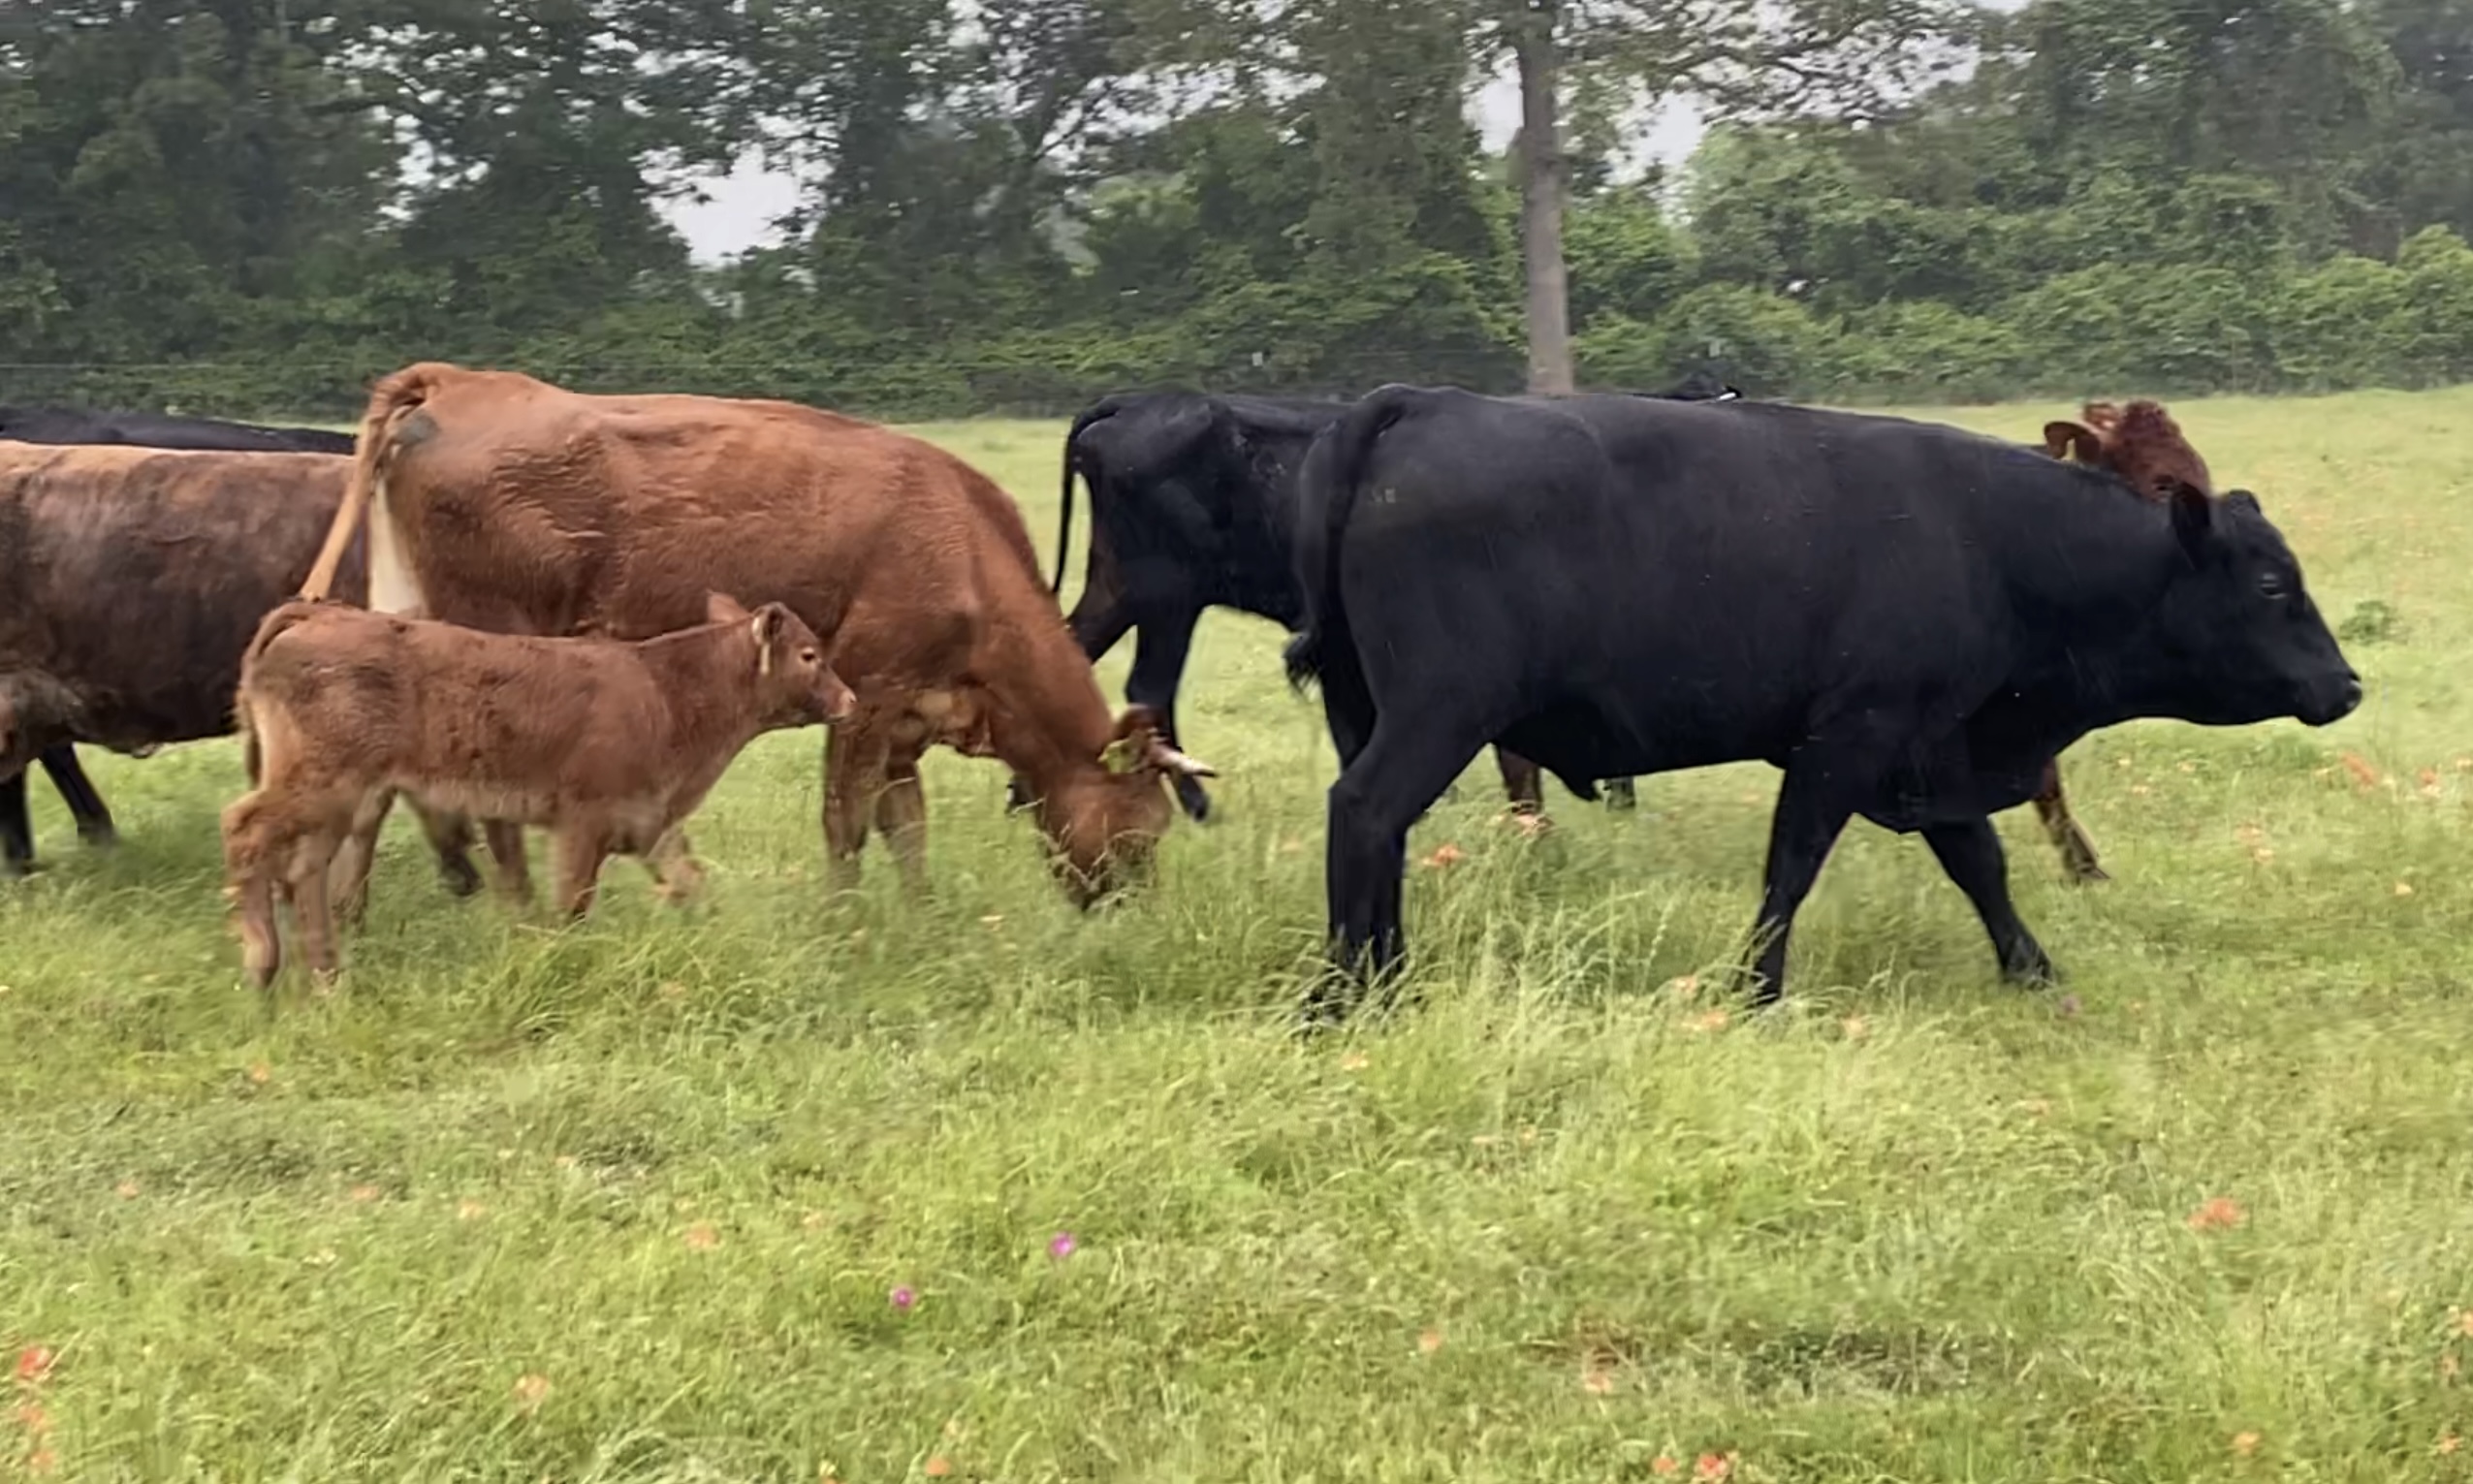 9 Black, Red and Yellow Crossbred Cows with Calves, #0417